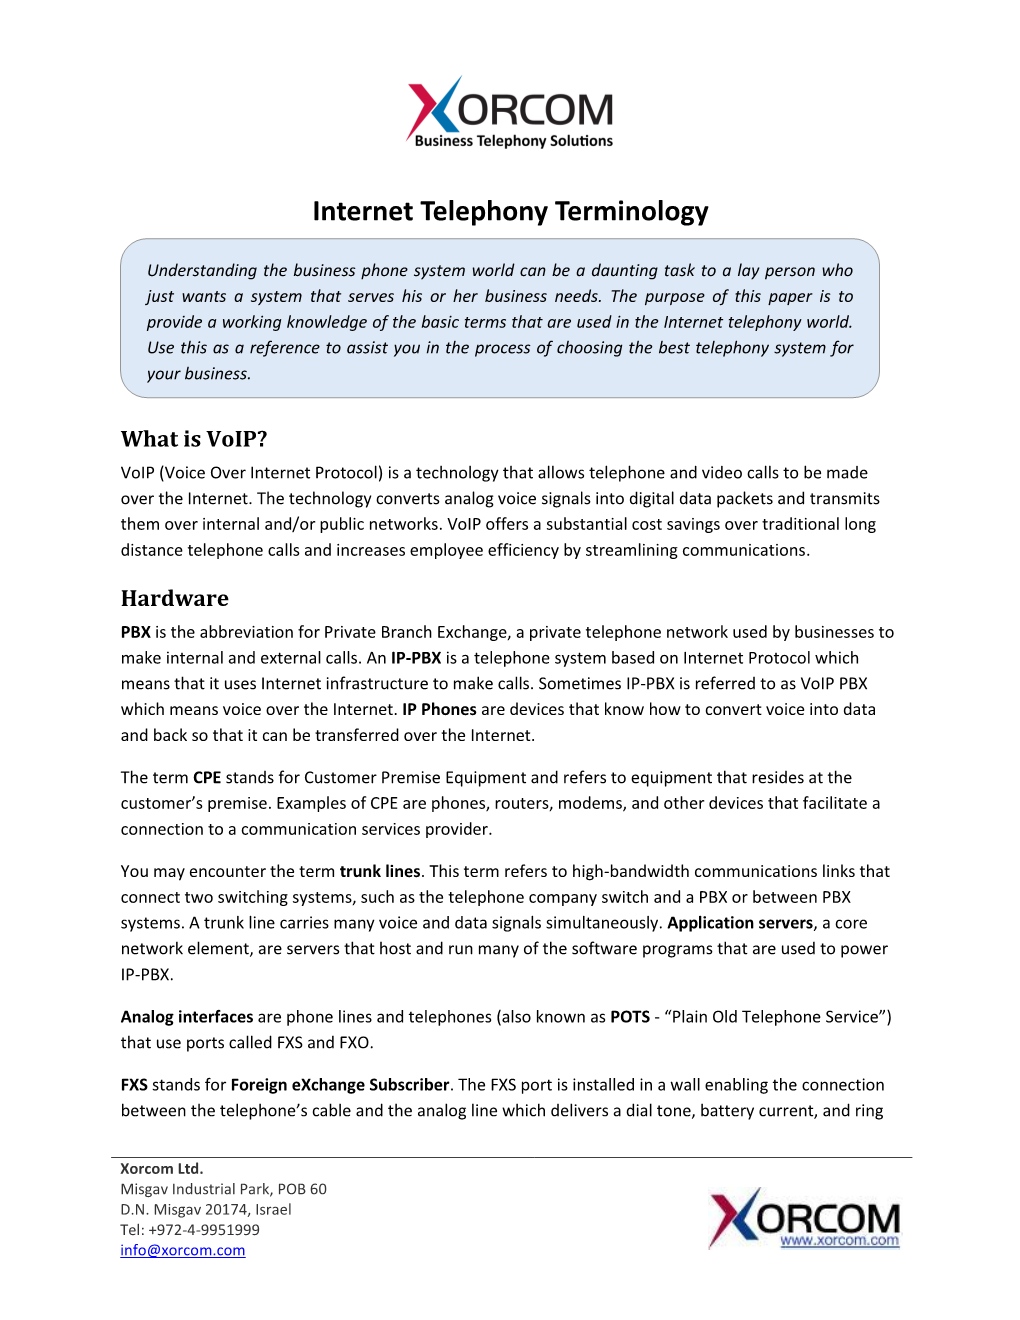 Guide to Business Telephony Terminology Page 2 of 5